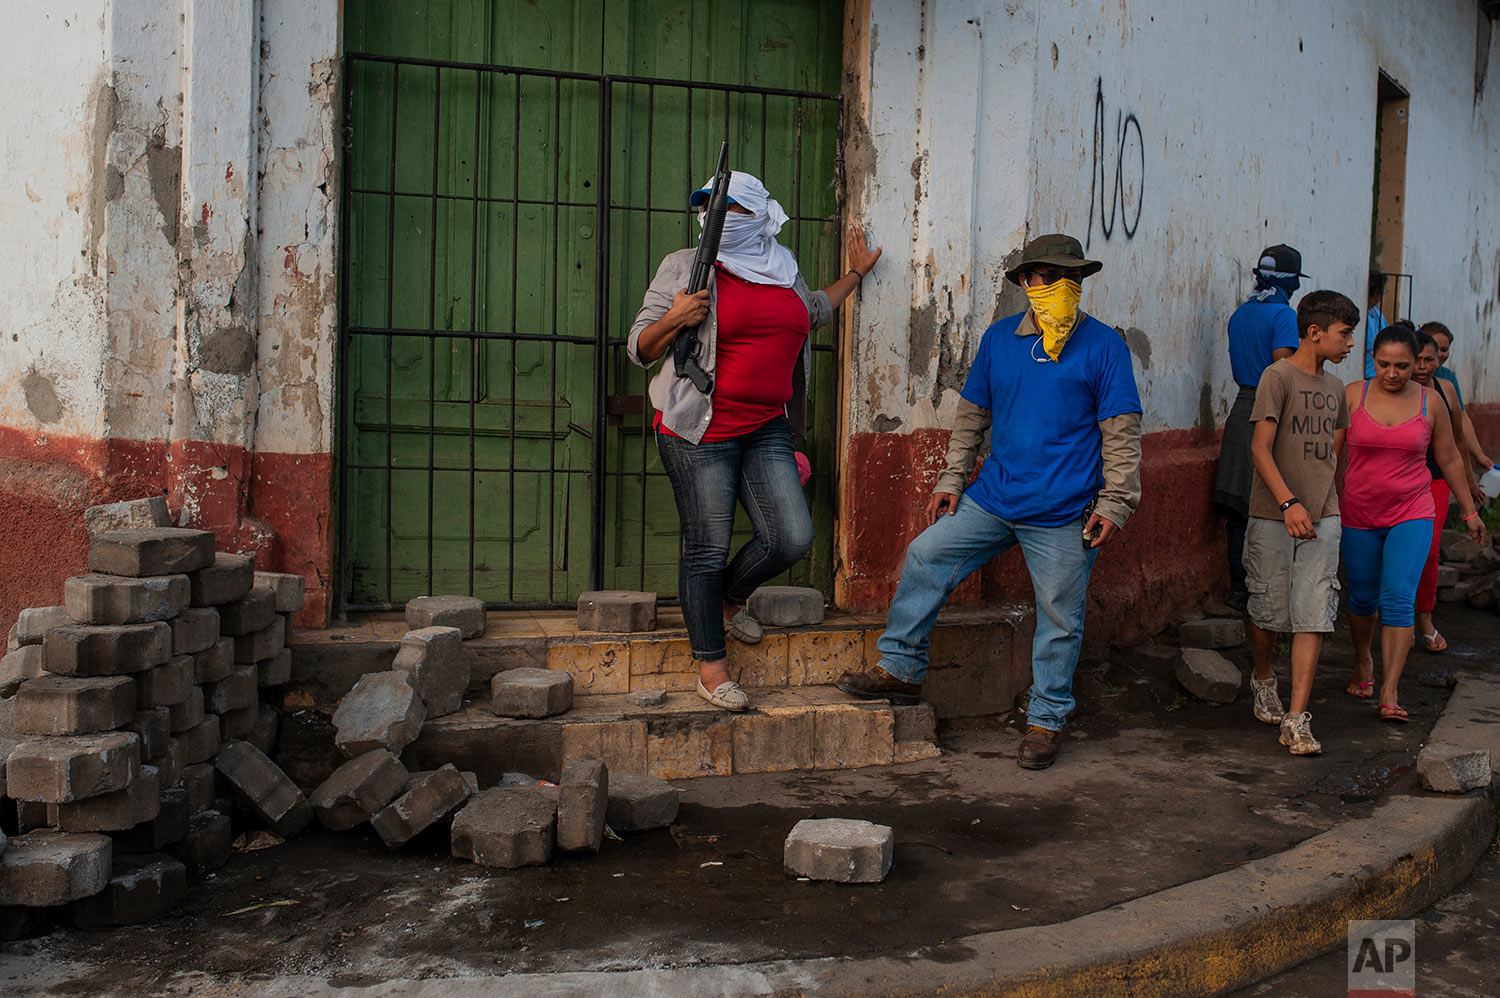  Pro-government Sandinista militia members stand guard at a torn down barricade, which had been set up by anti-government protesters, after police and militias stormed the Monimbo neighborhood of Masaya, Nicaragua, July 17, 2018. Heavily armed police and militias laid siege to and then retook a symbolically important neighborhood that had recently become a center of resistance to President Daniel Ortega's government. (AP Photo/Cristobal Venegas) 